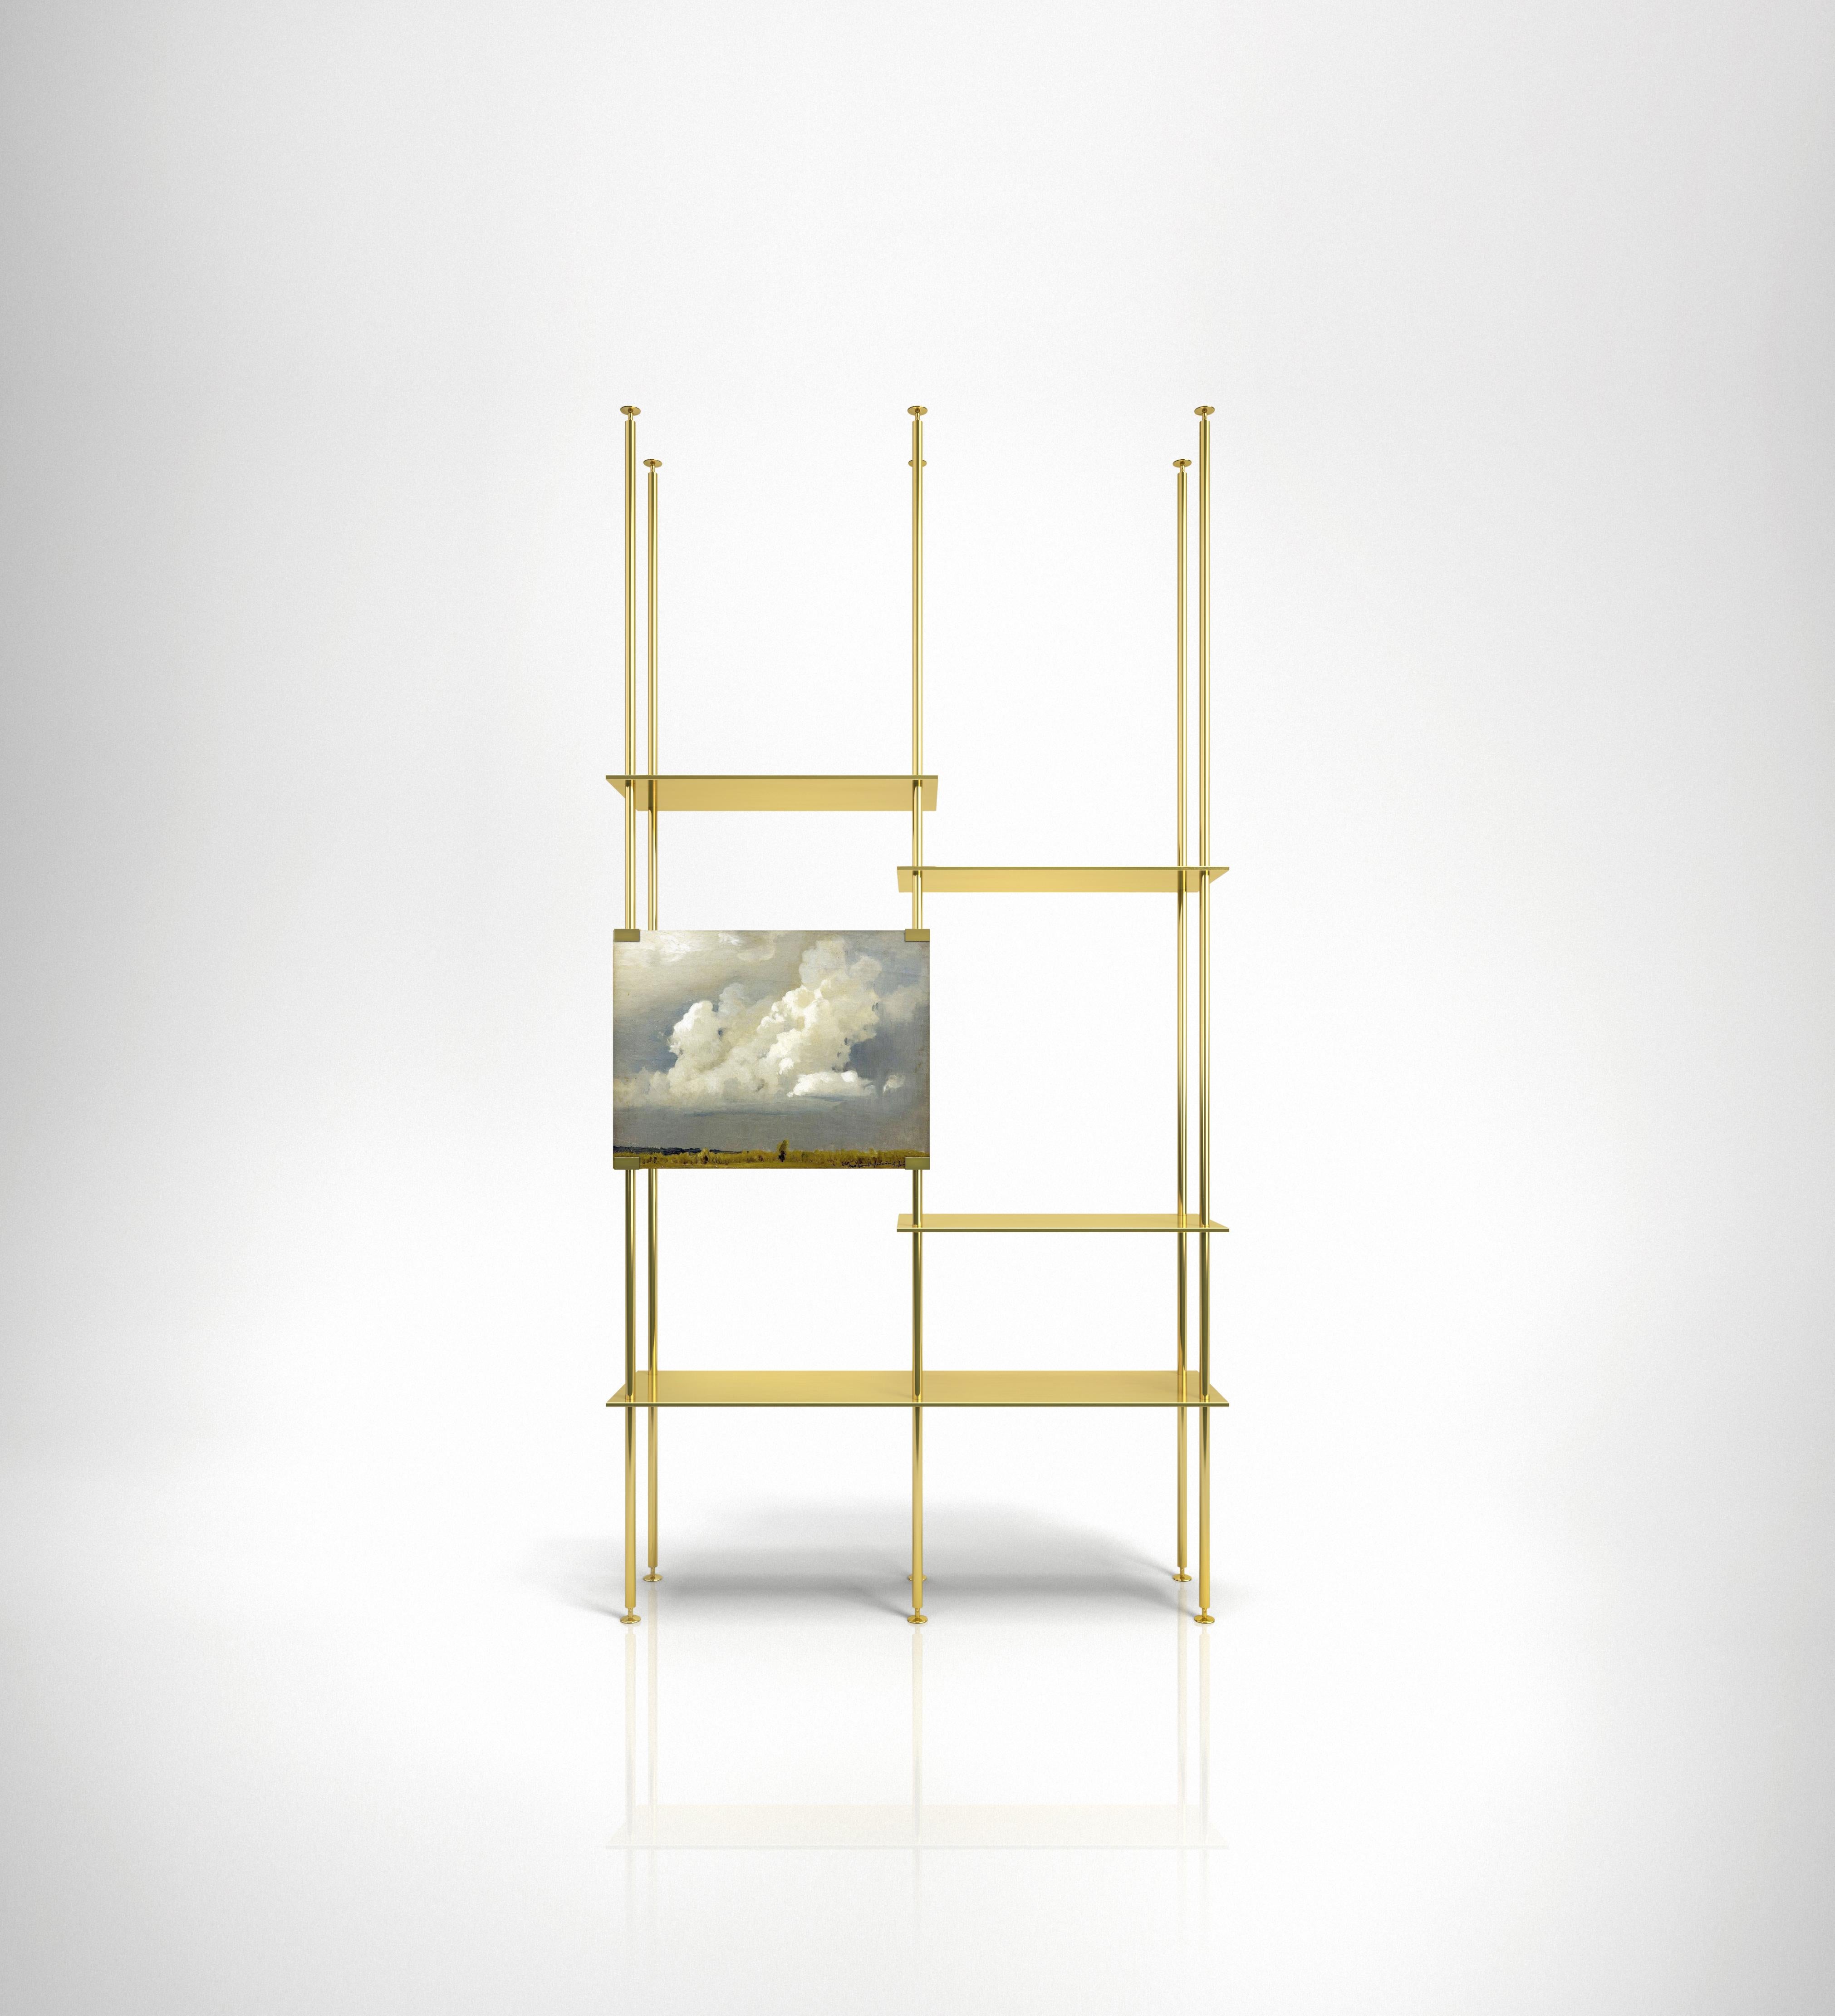 Bookcase 02
Floor to ceiling bookcase entirely made of brass. The structure has no visible joints or screws becoming an asymmetric shape that merges organically in its context. It comes with a separate element that allows the bookcase to be fixed